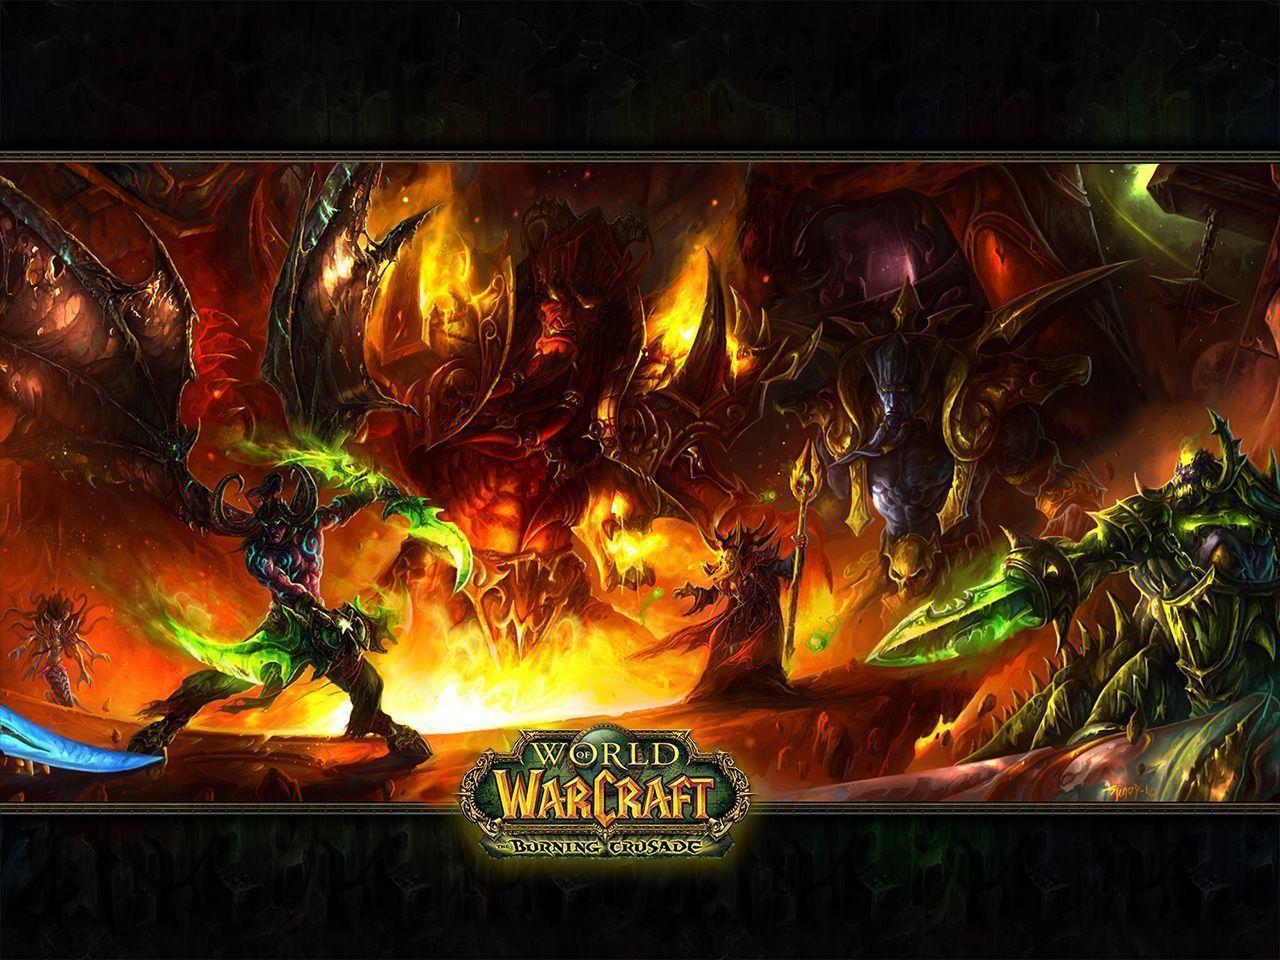 image For > Wow Shaman Wallpaper